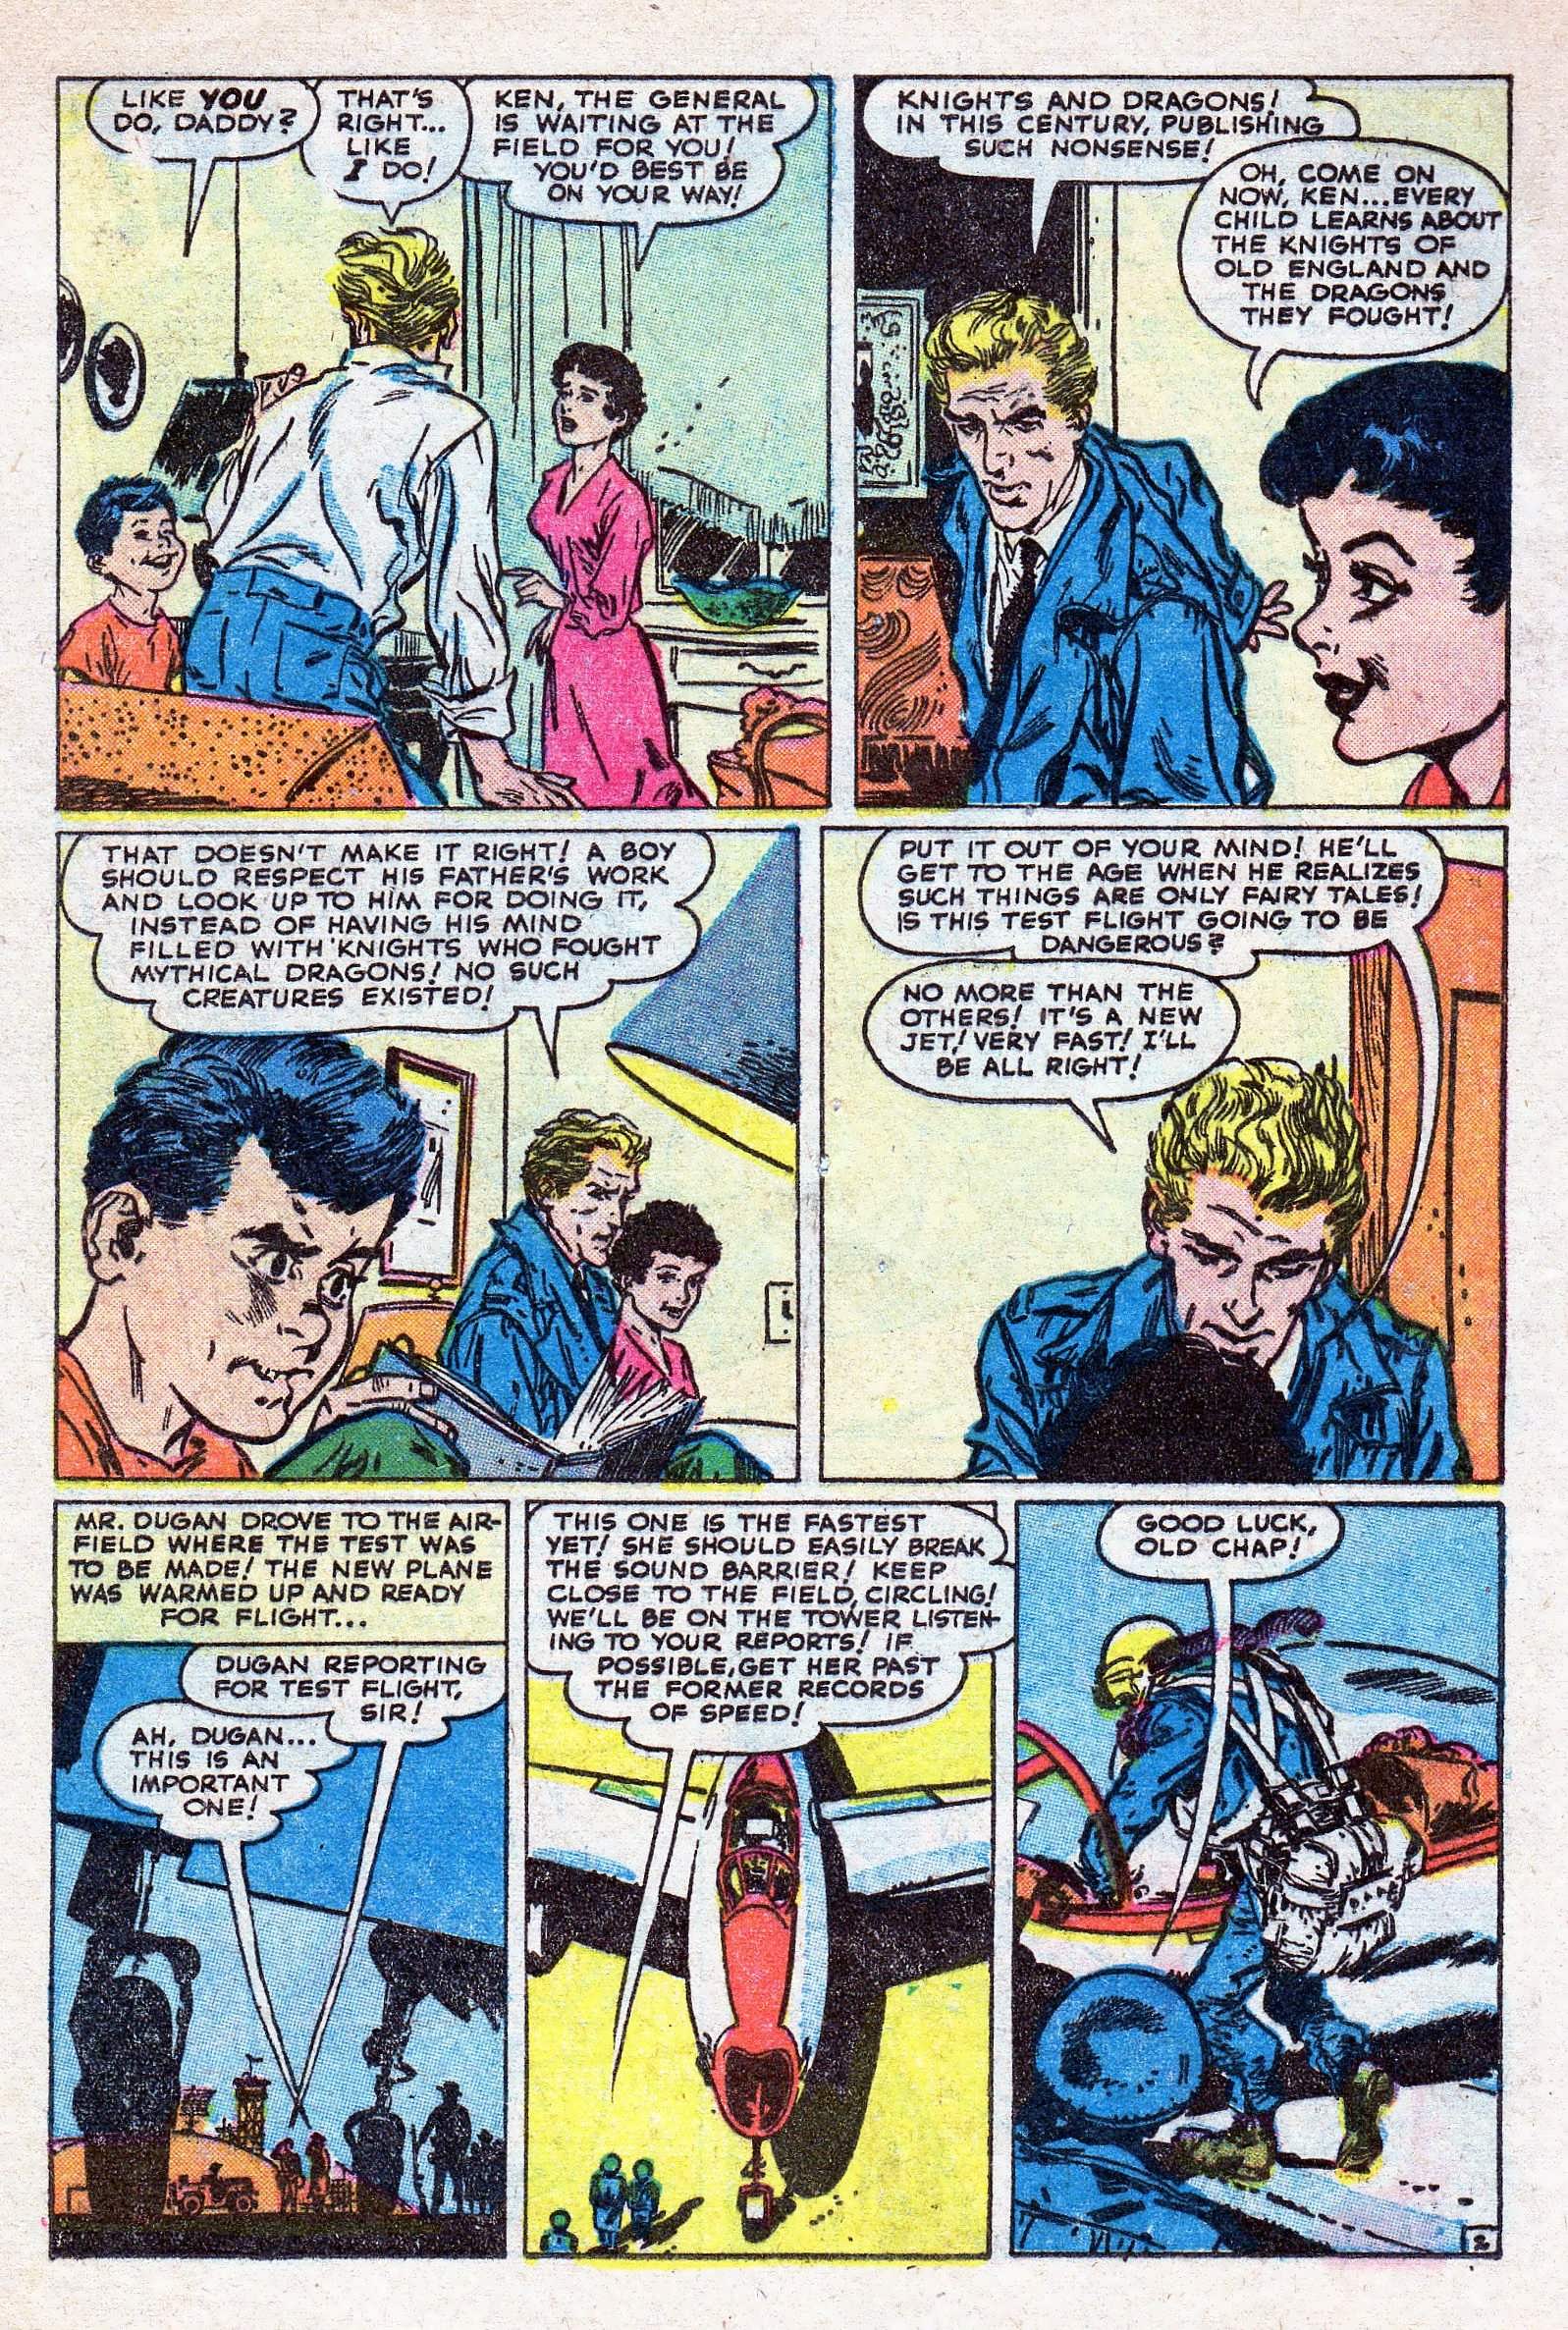 Marvel Tales (1949) 135 Page 3